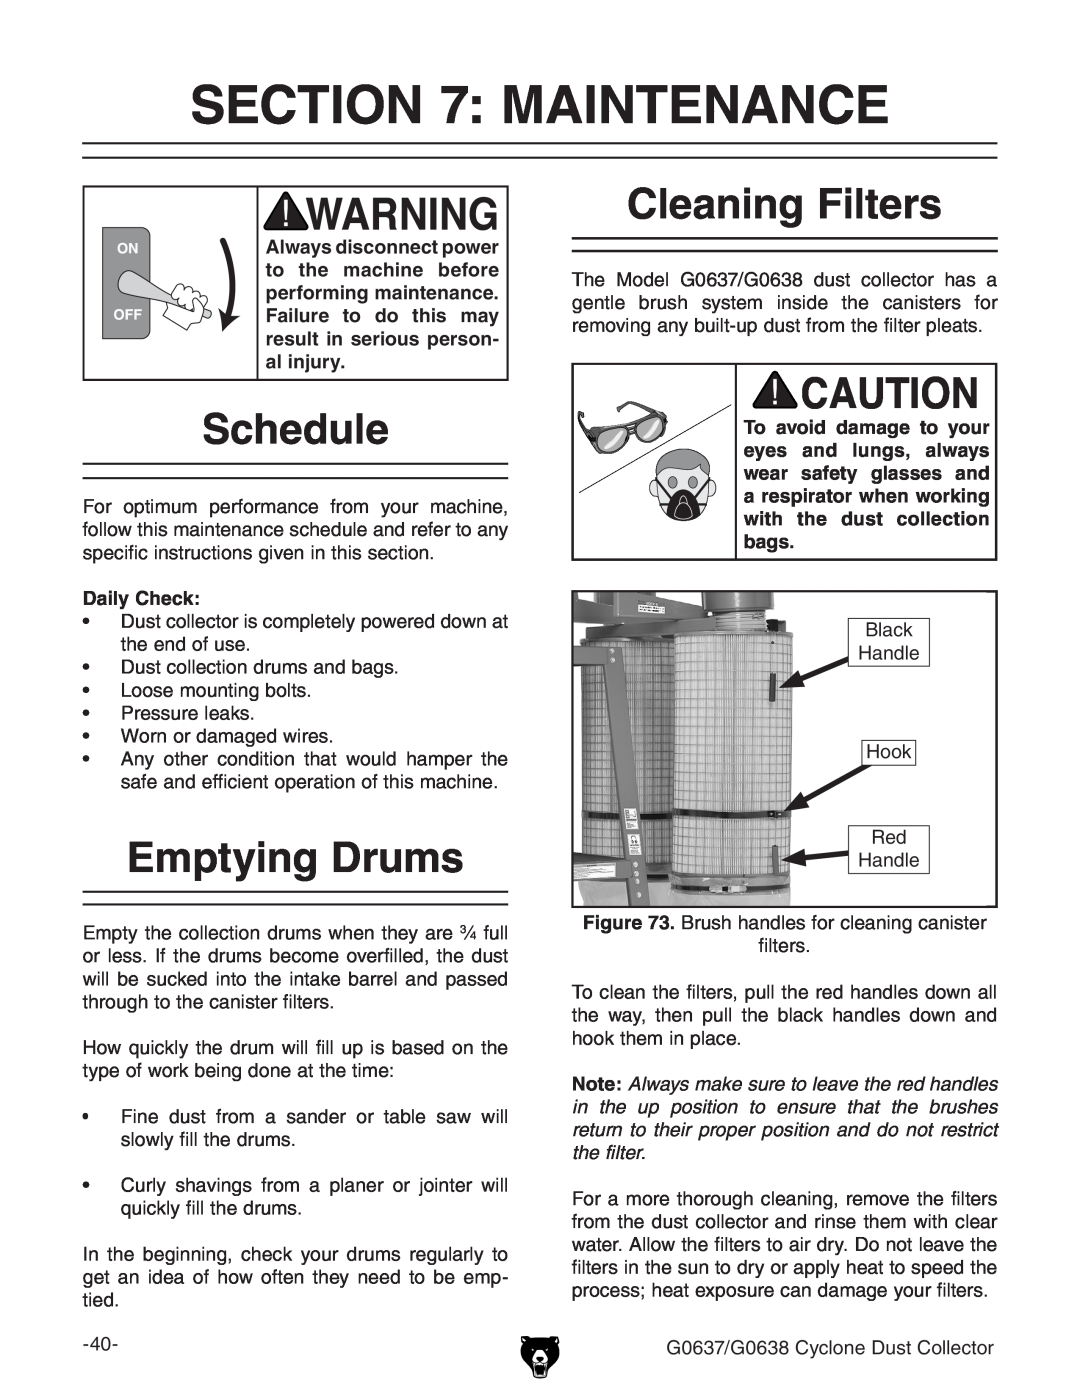 Grizzly G0637, G0638 owner manual Maintenance, Schedule, Emptying Drums, Cleaning Filters 